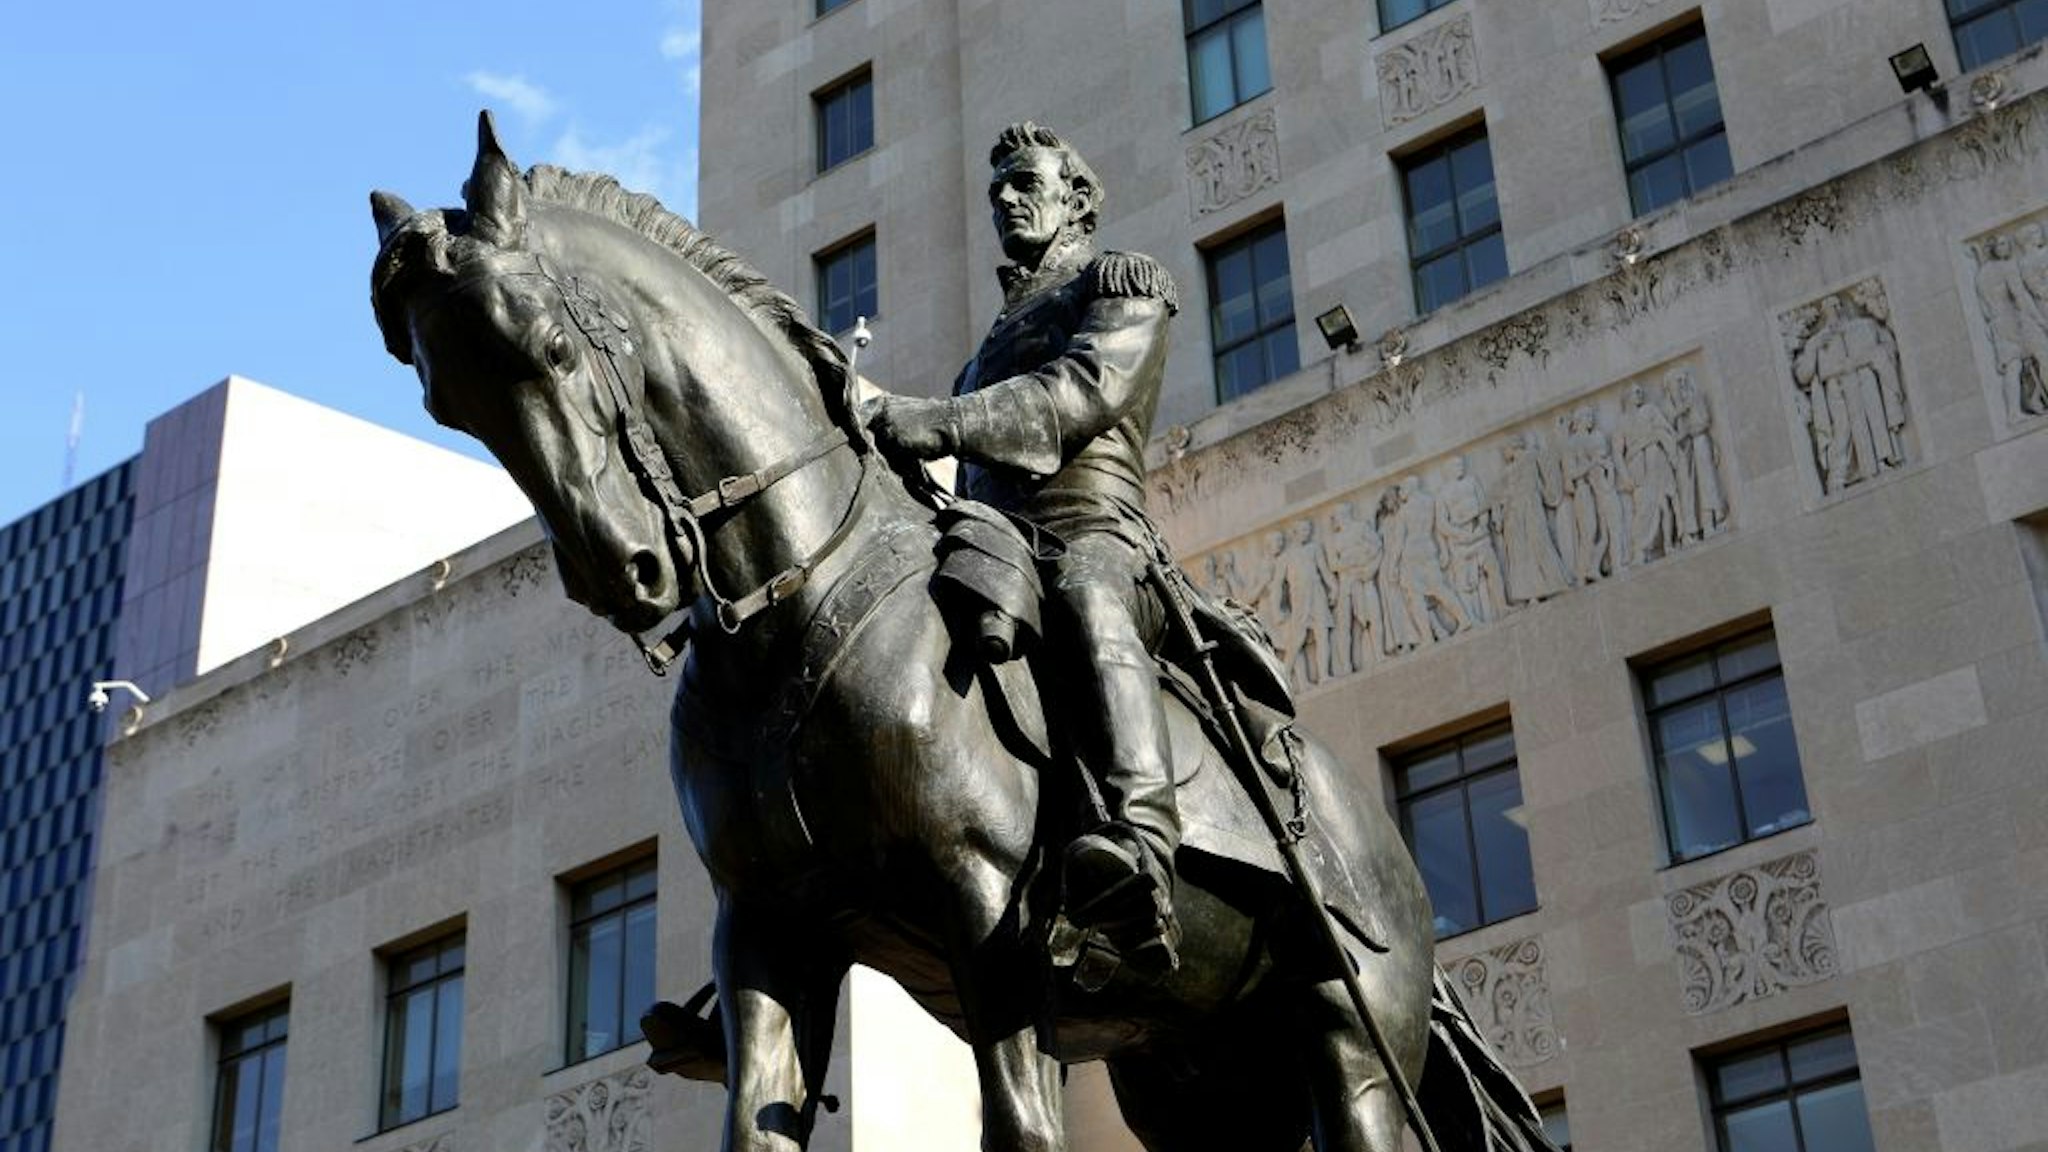 KANSAS CITY - AUGUST 12: Andrew Jackson statue stands outside the Jackson County Courthouse in Kansas City, Missouri on August 12, 2017.